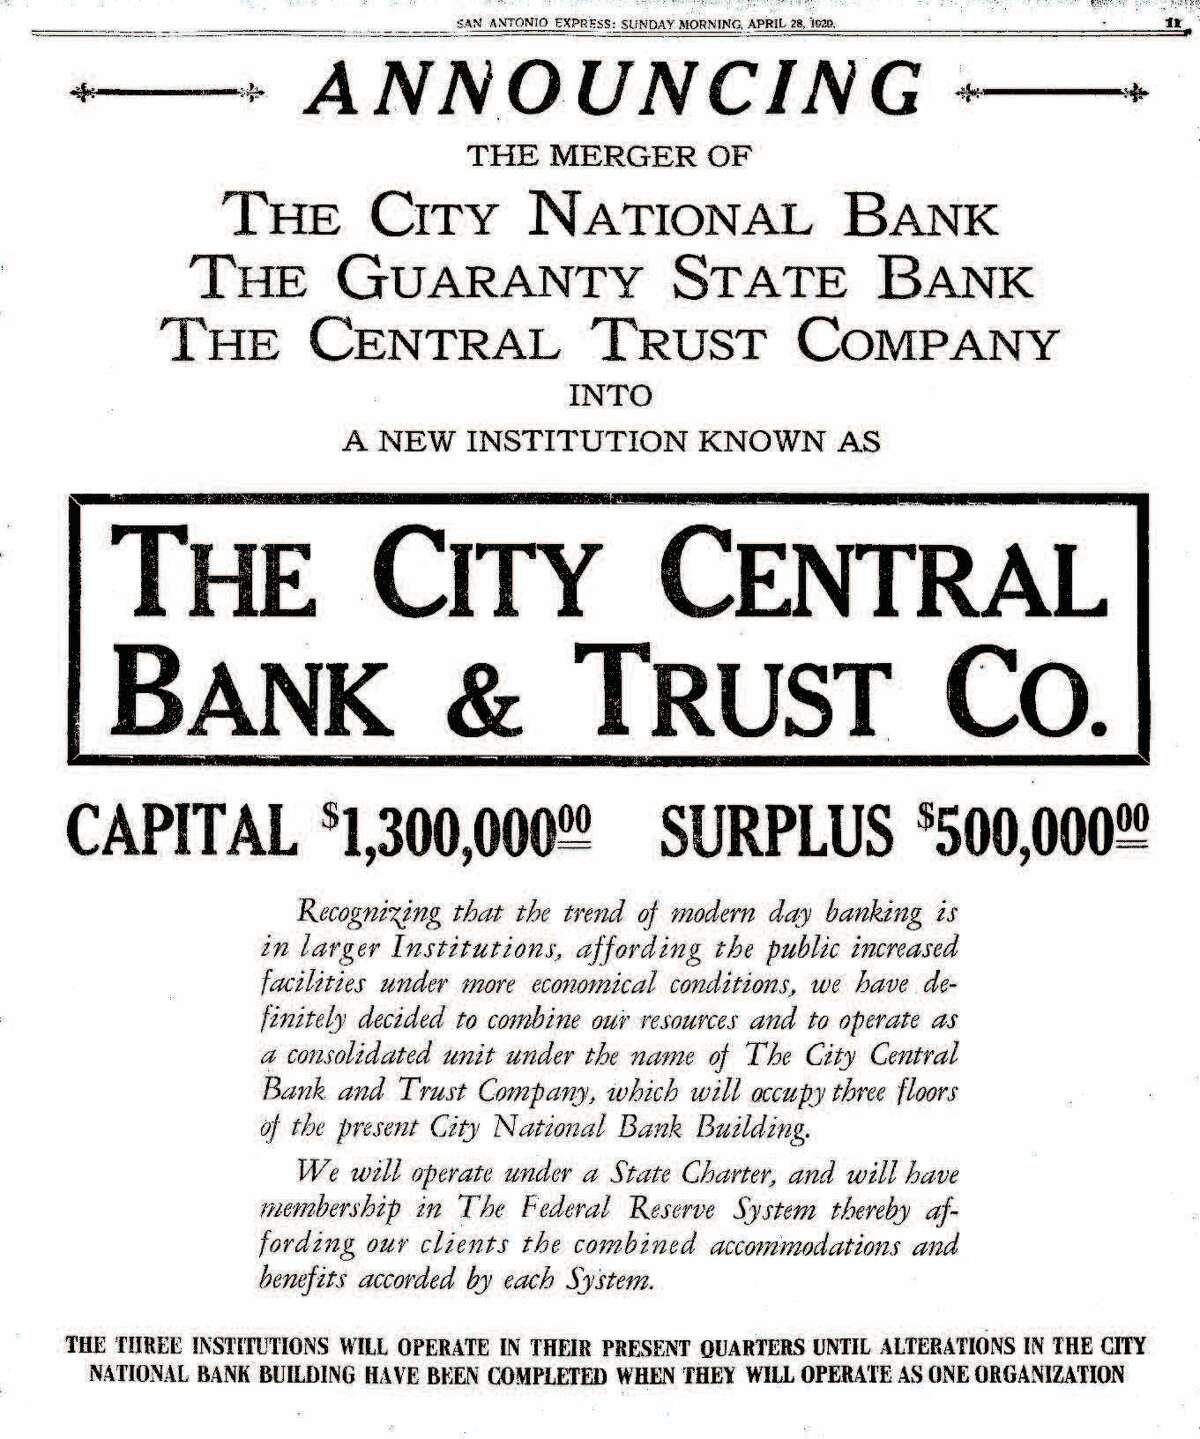 An ad in the San Antonio Express announces the merger of the three banks and its combined assets.